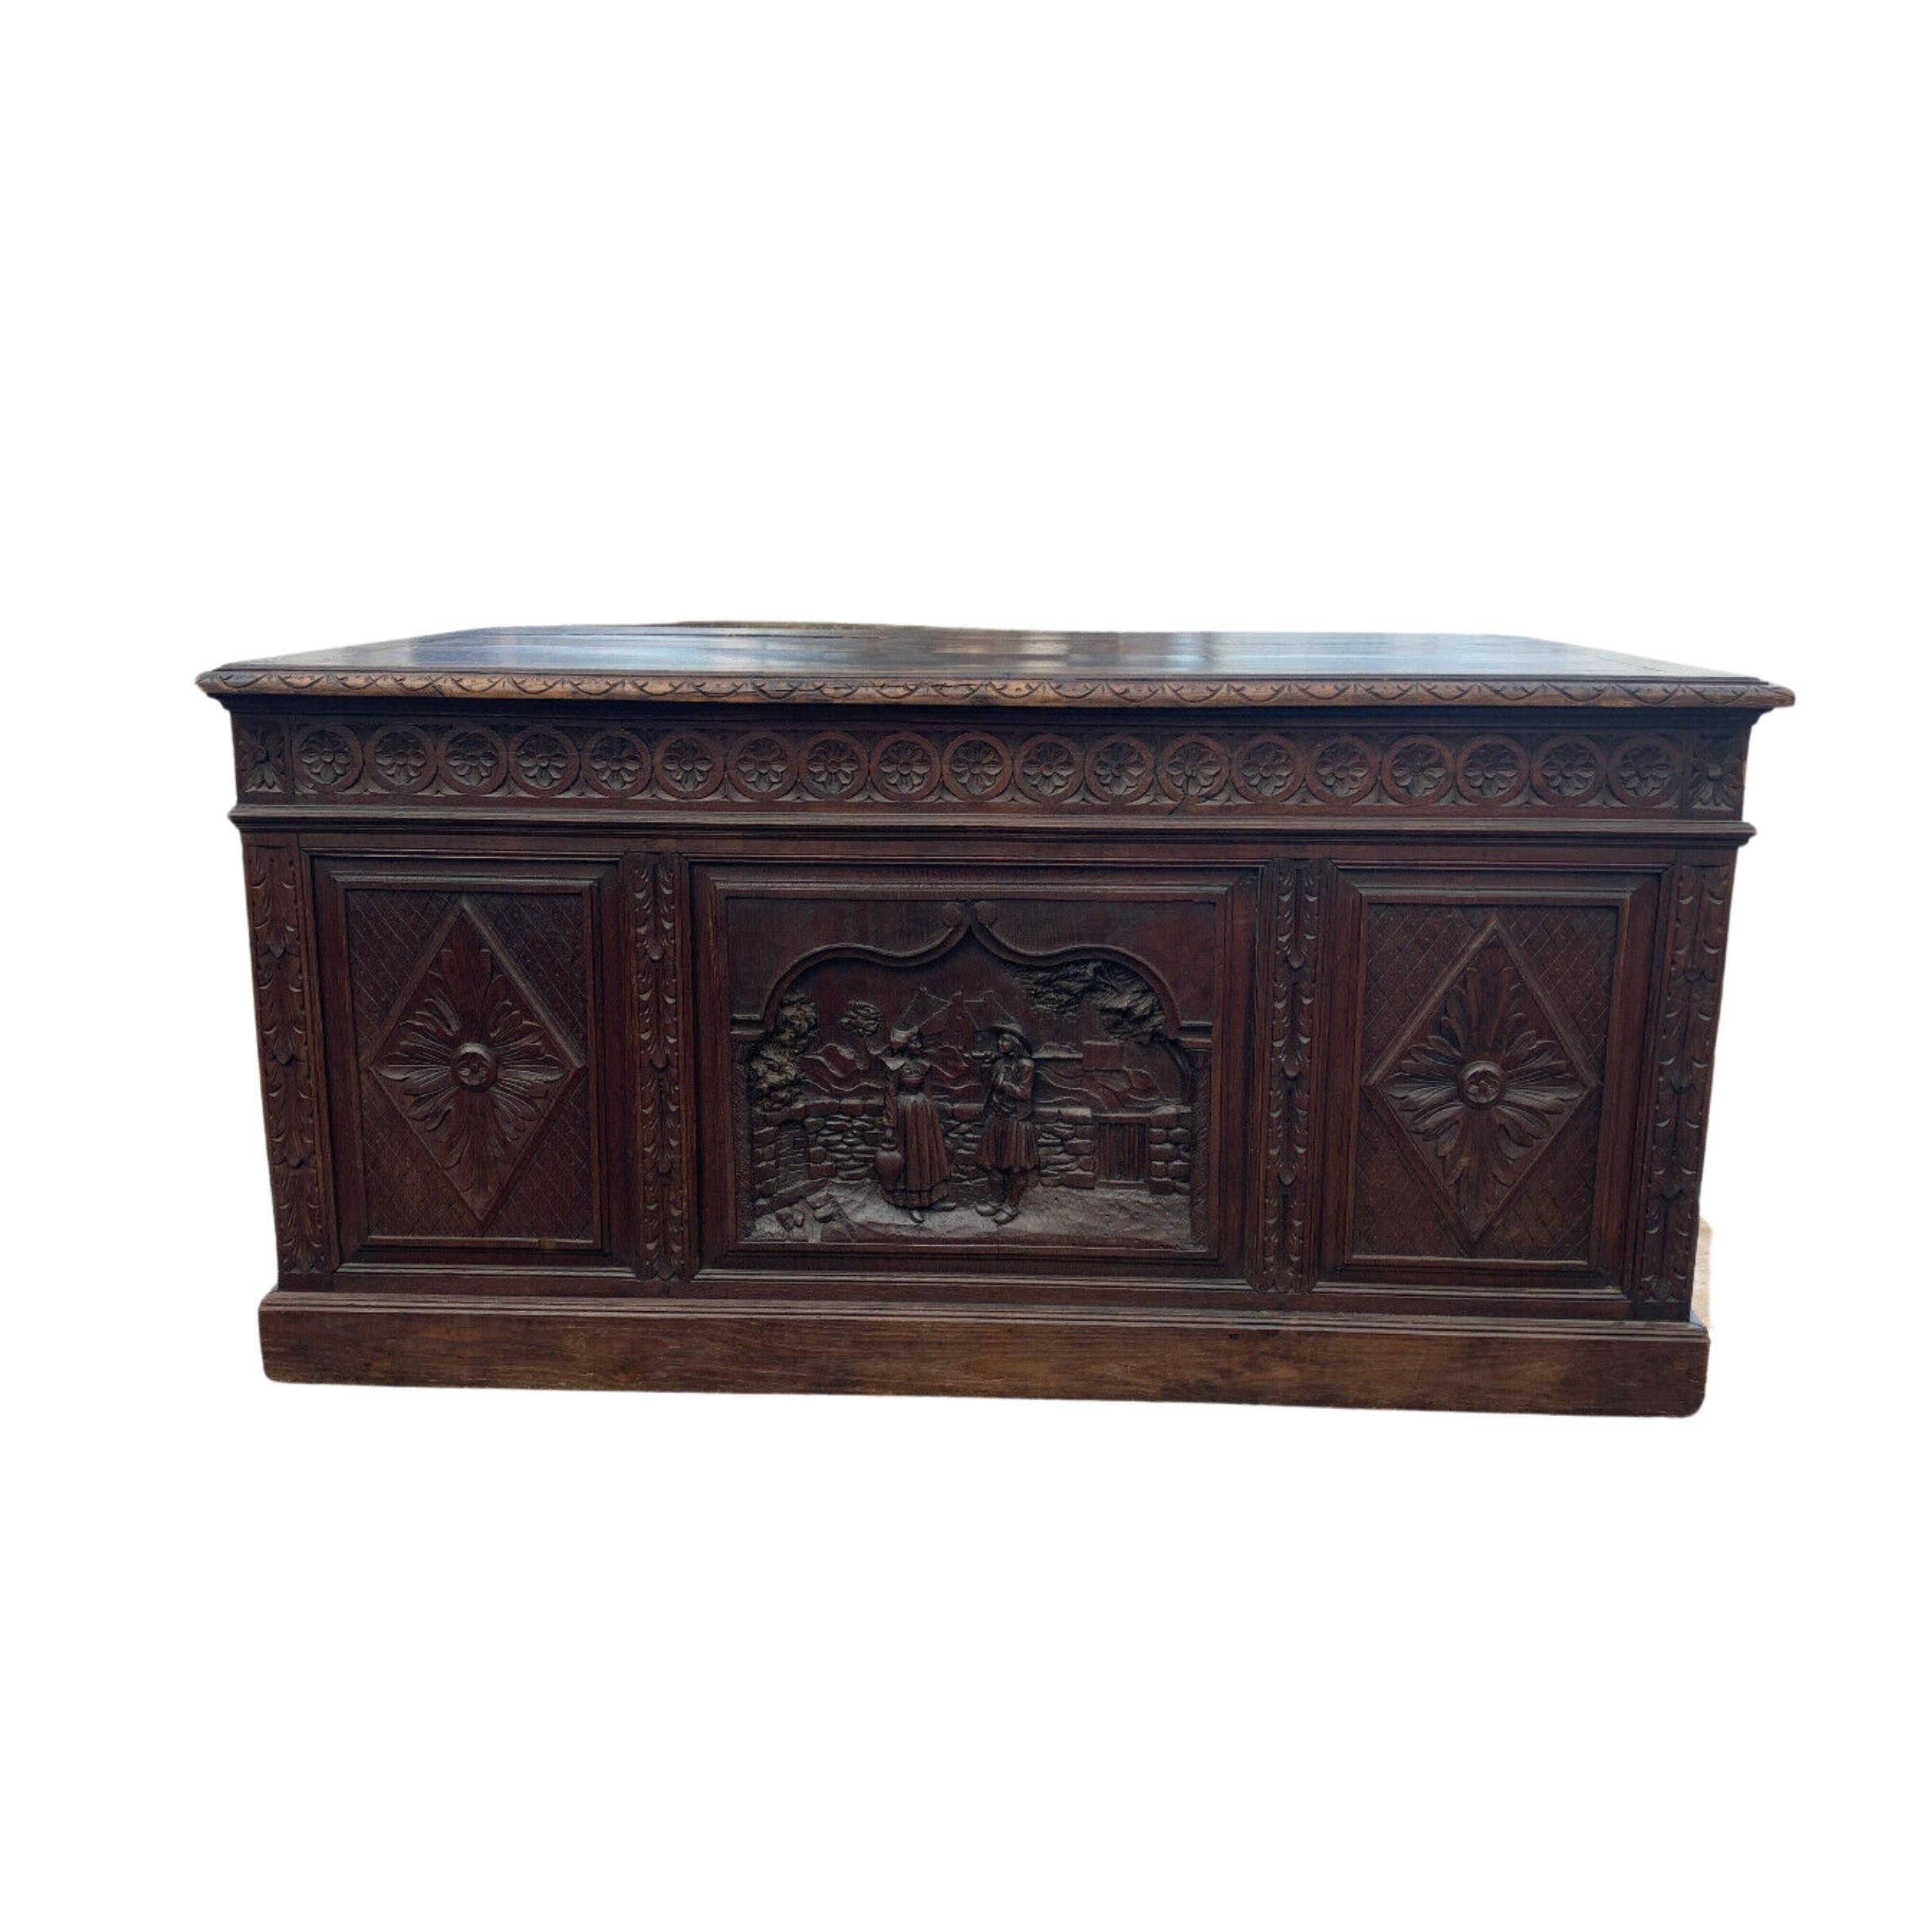 1800's Antique Breton, Highly Carved, Rare, 6 Drawers, French Desk For Sale 11